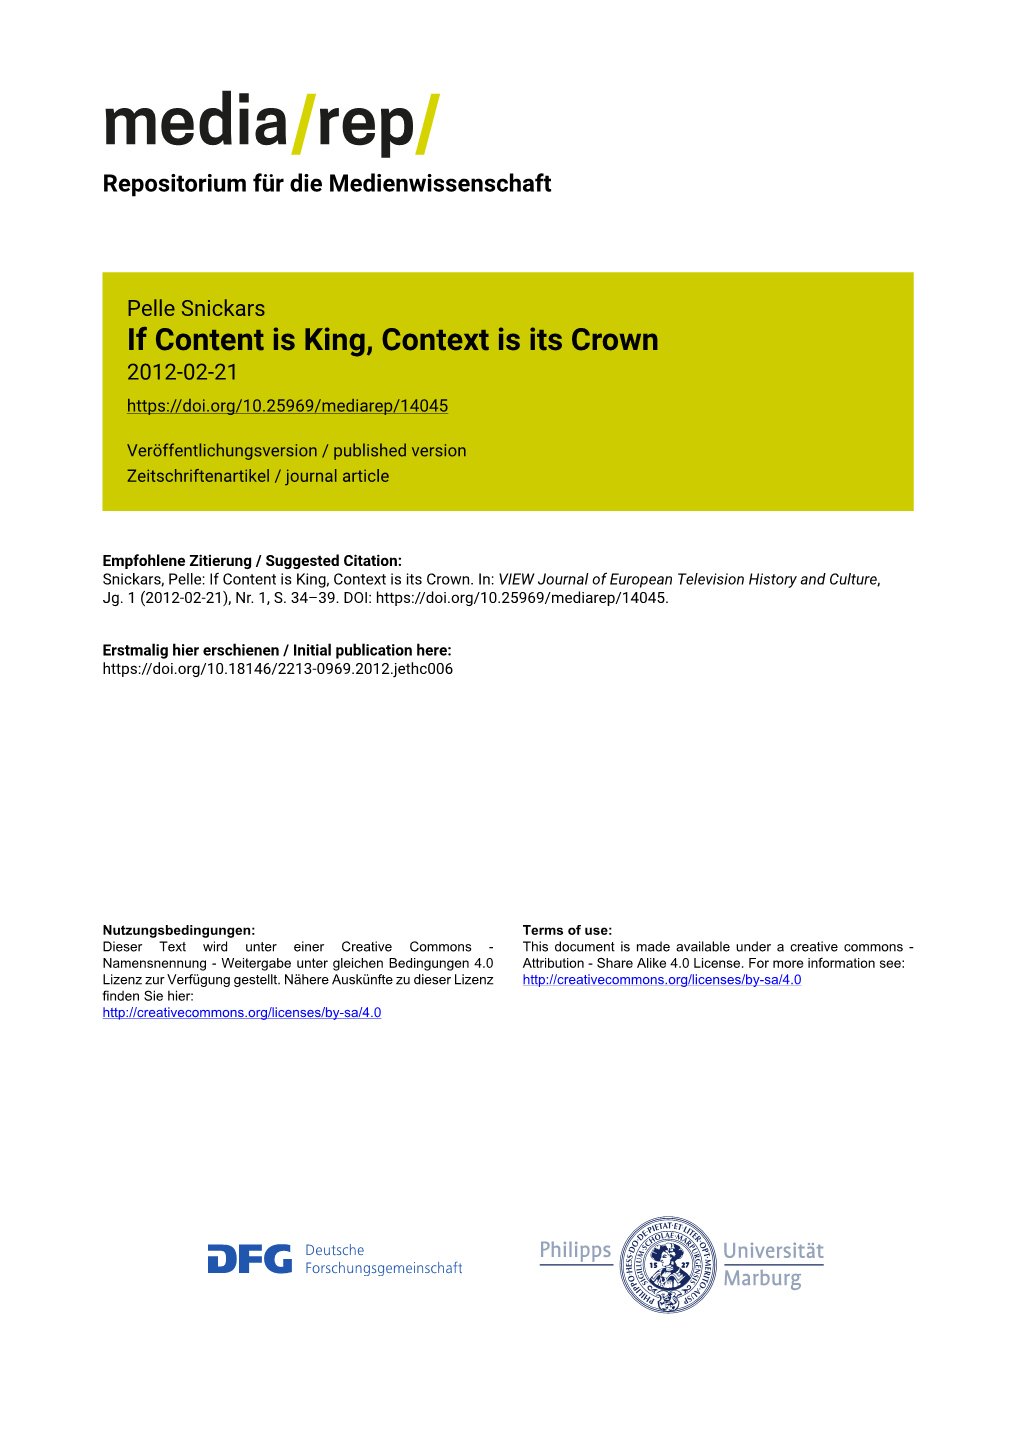 If Content Is King, Context Is Its Crown 2012-02-21